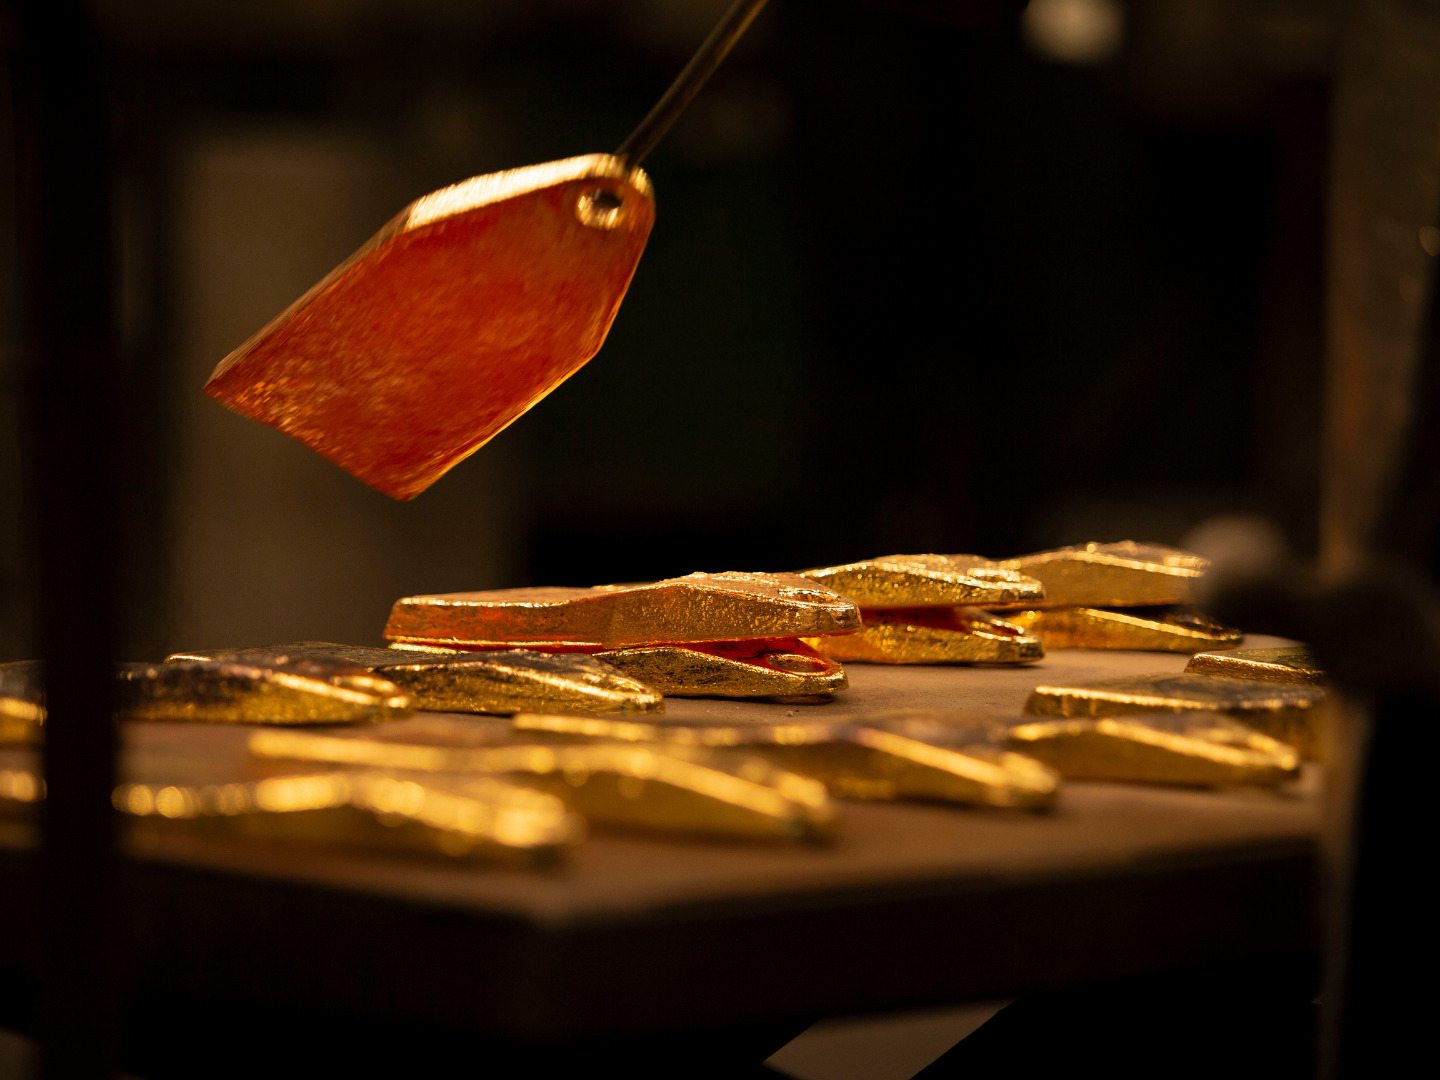 Perth Mint  gold annodes being taken out of the moulds